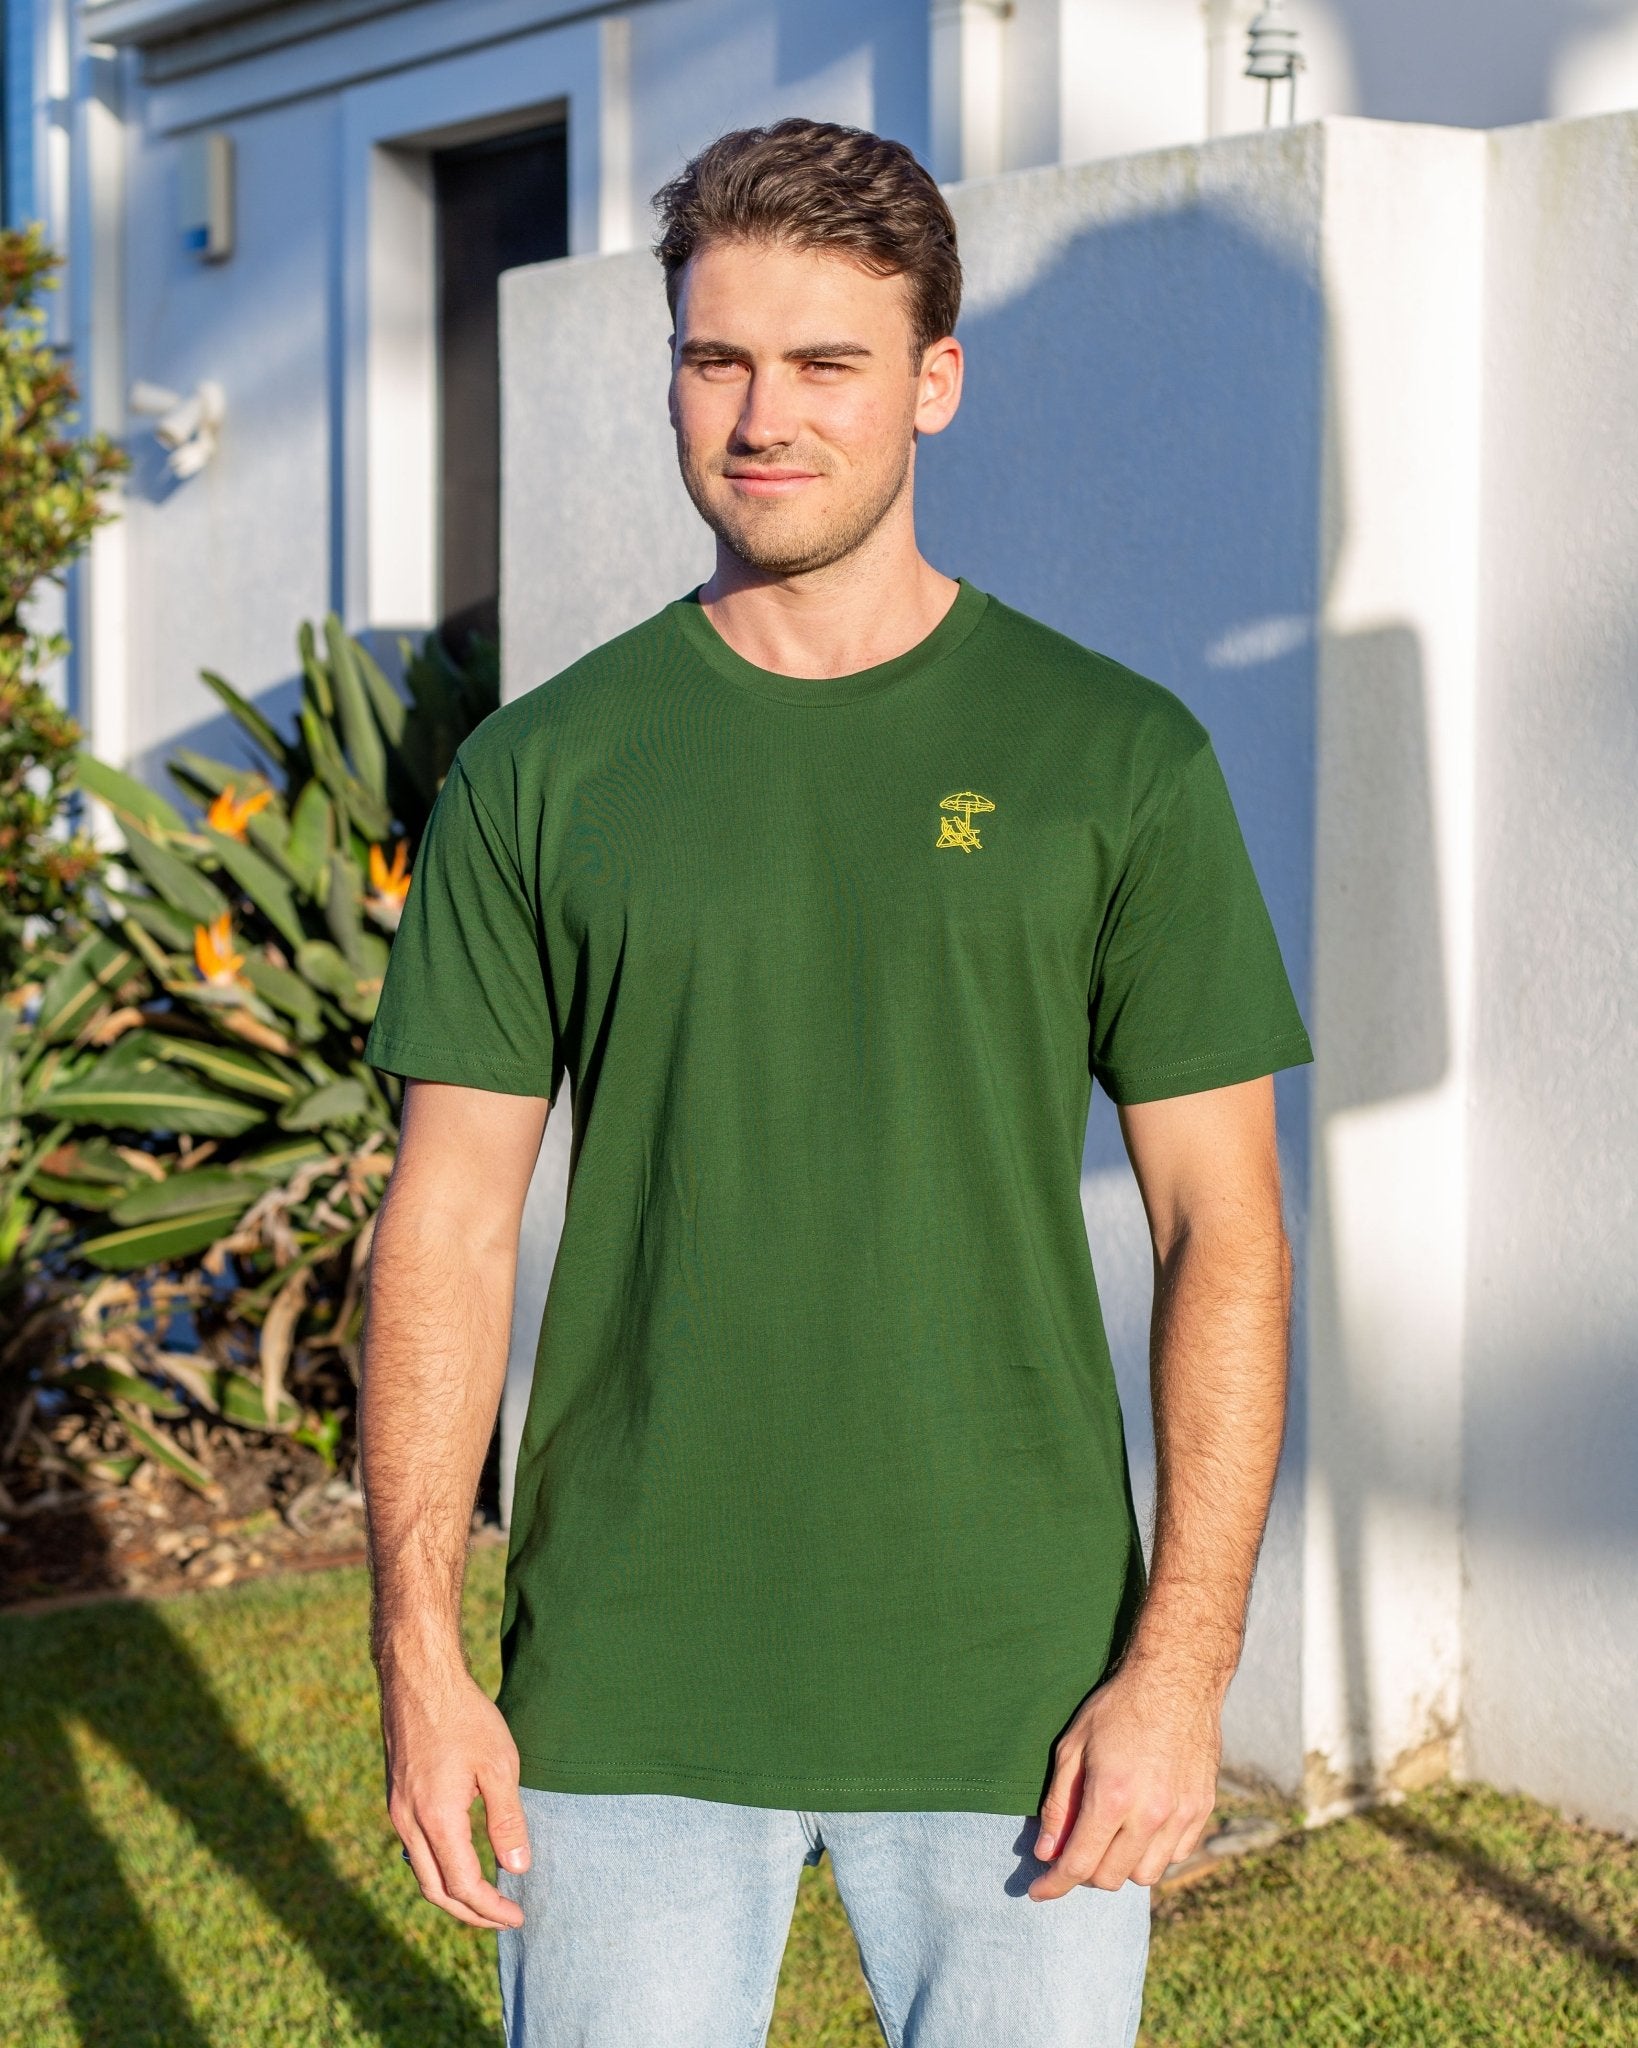 Man wearing green coloured tshirt with yellow embroidered design 